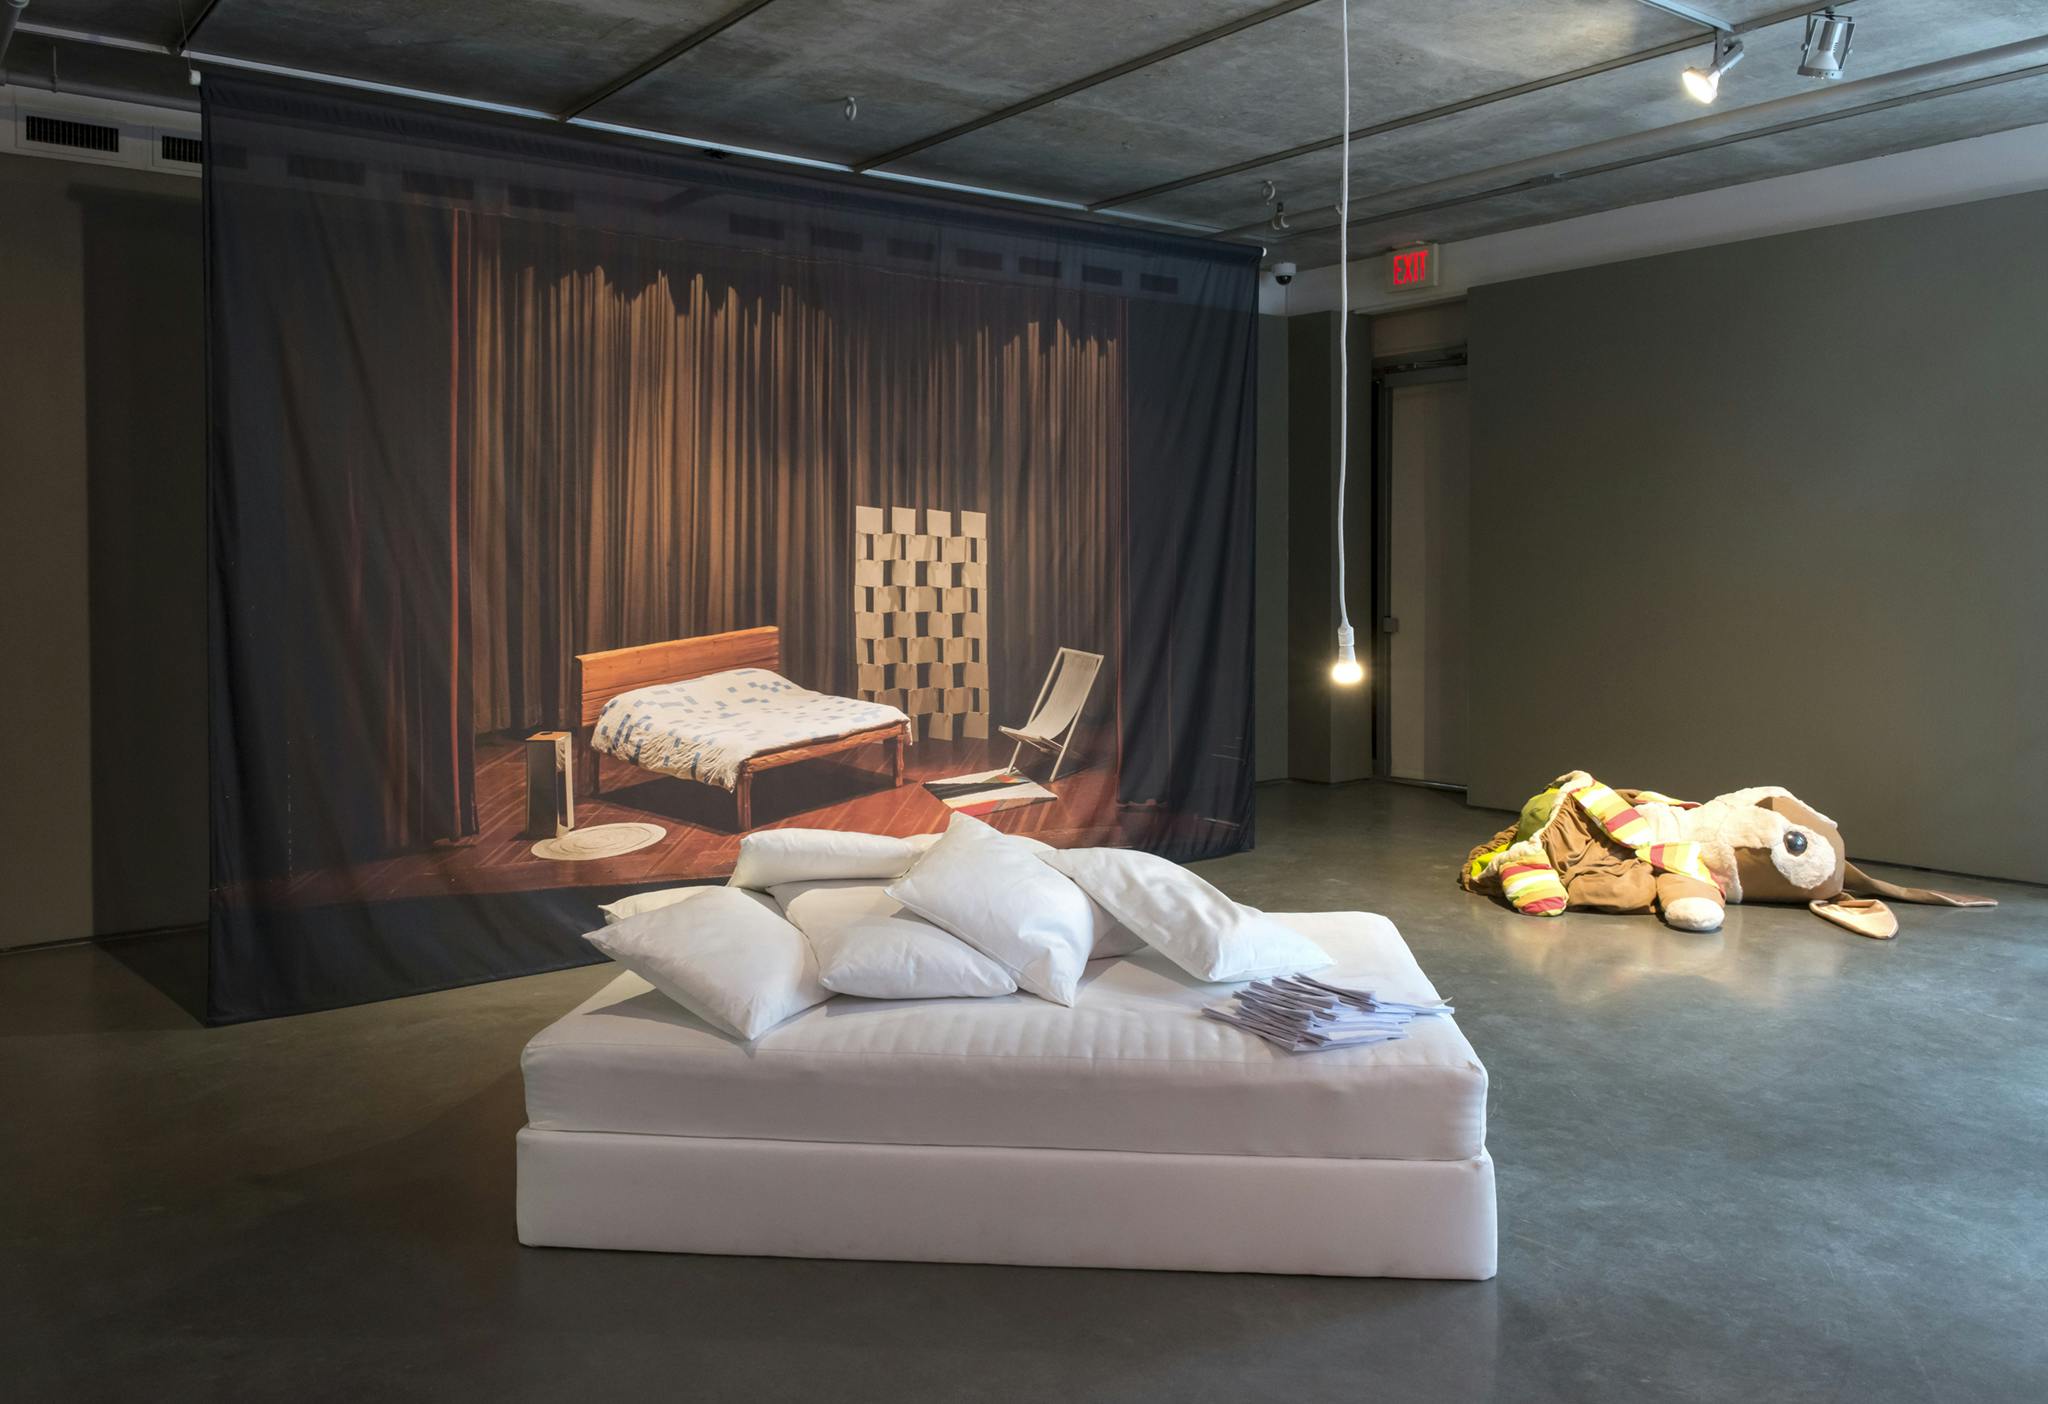 In the center of a gallery are mattresses piled with pillows. Behind a curtain with a printed photo of a bedroom stage set hangs from the ceiling and a large stuffed animal bunny lies on the floor. 